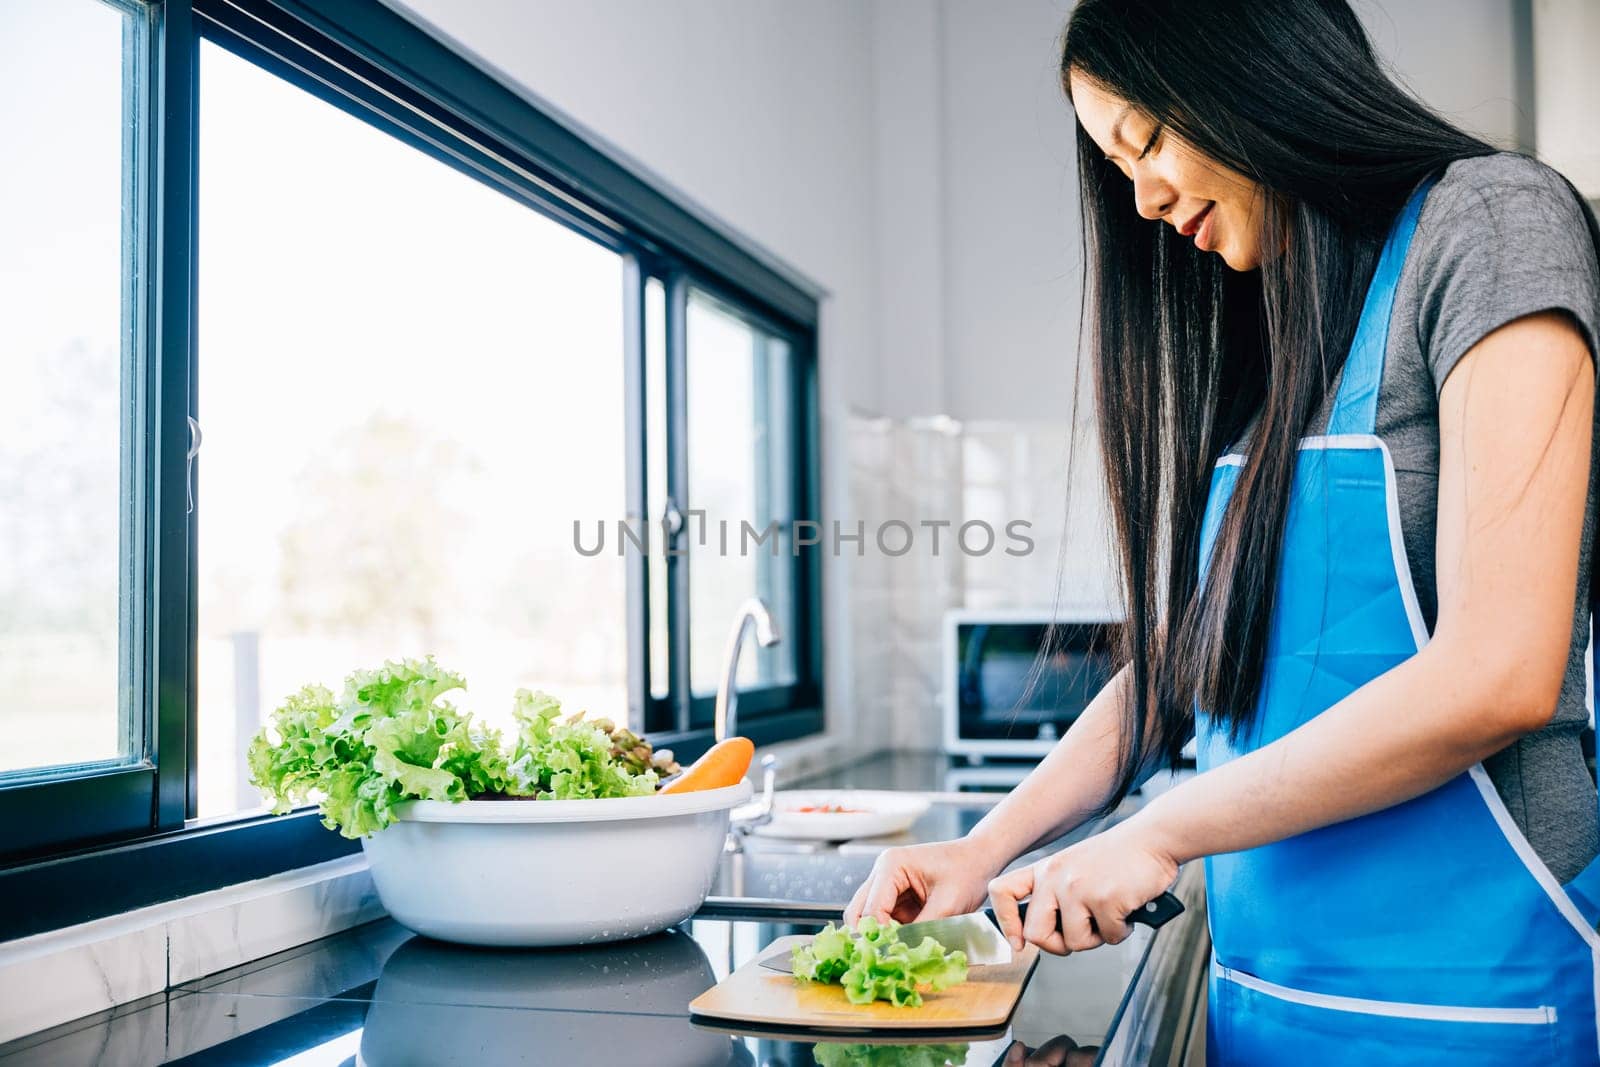 A smiling woman in an apron prepares a healthy dinner cutting vegetables for a delicious salad in her home kitchen. Close-up of a cheerful housewife making a nutritious meal.